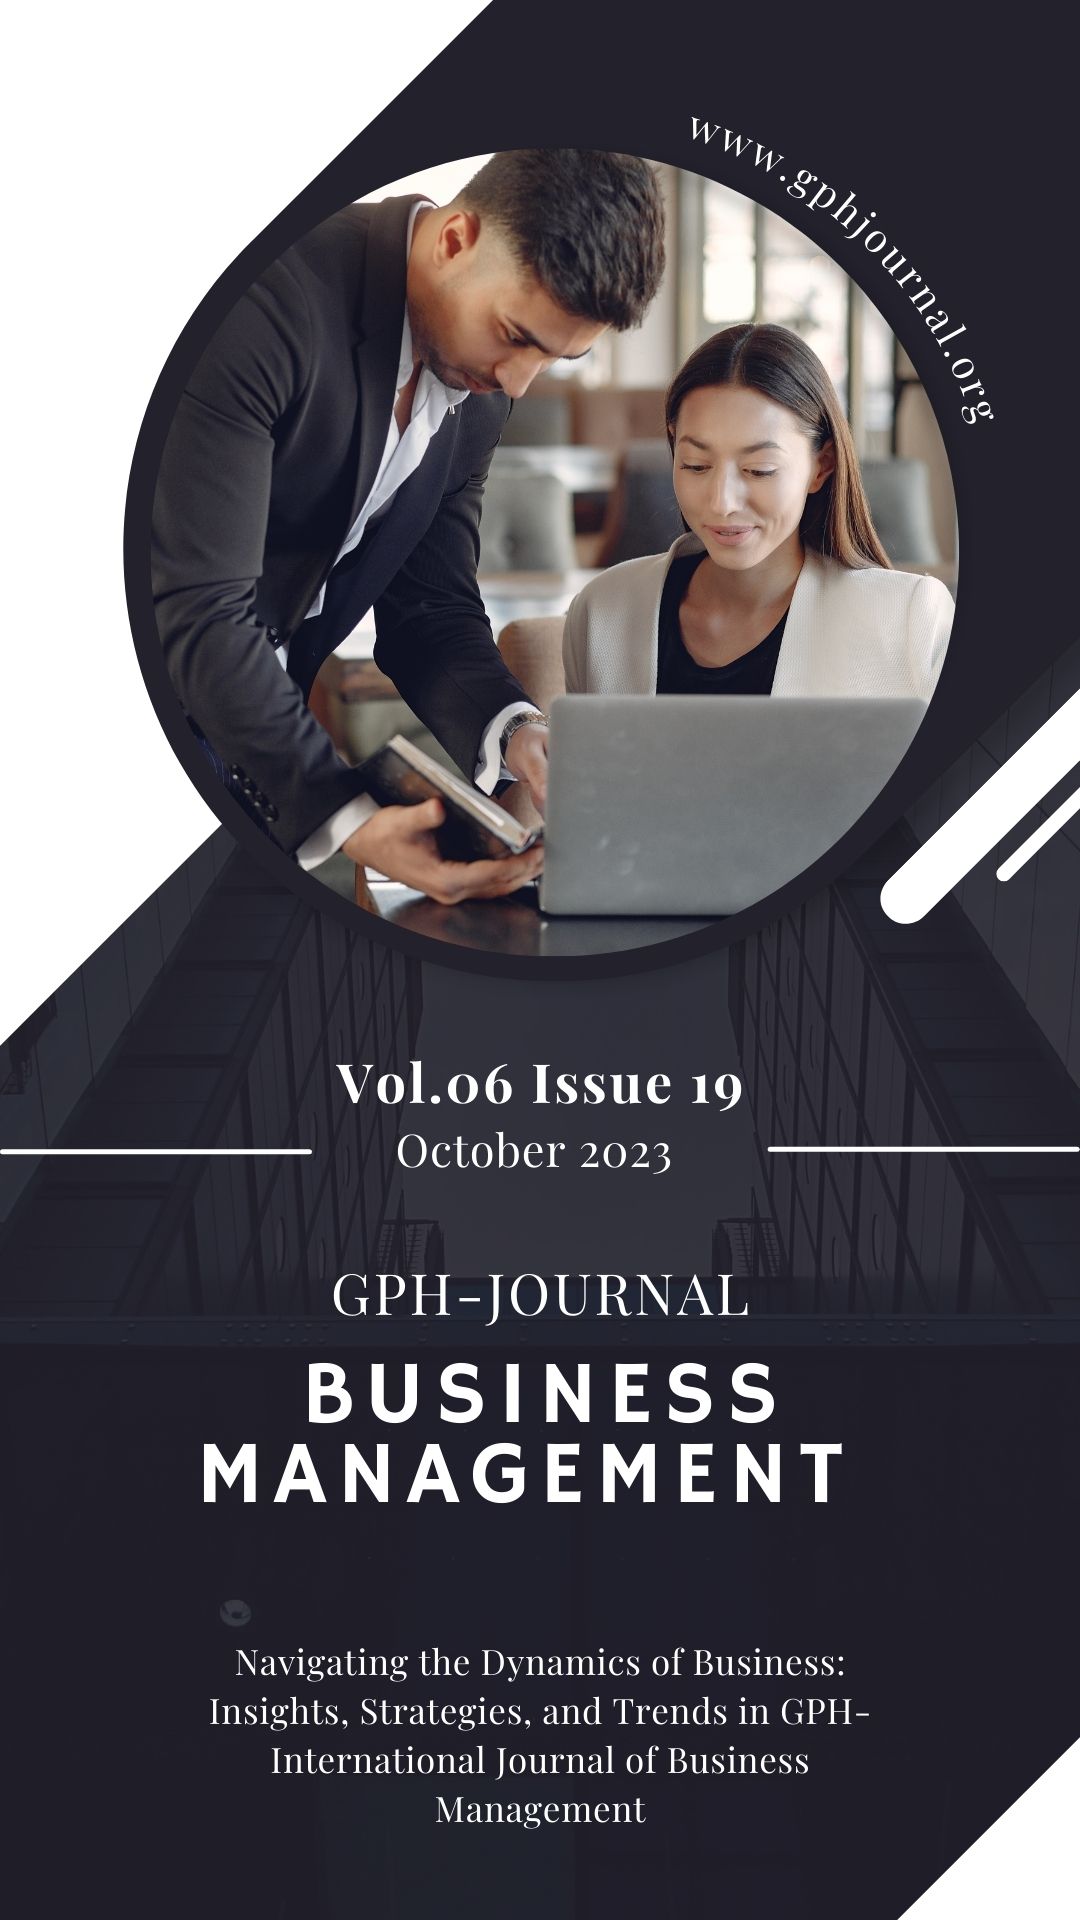 vol 06 issue 10 gph, business, management, journal, papers, publish